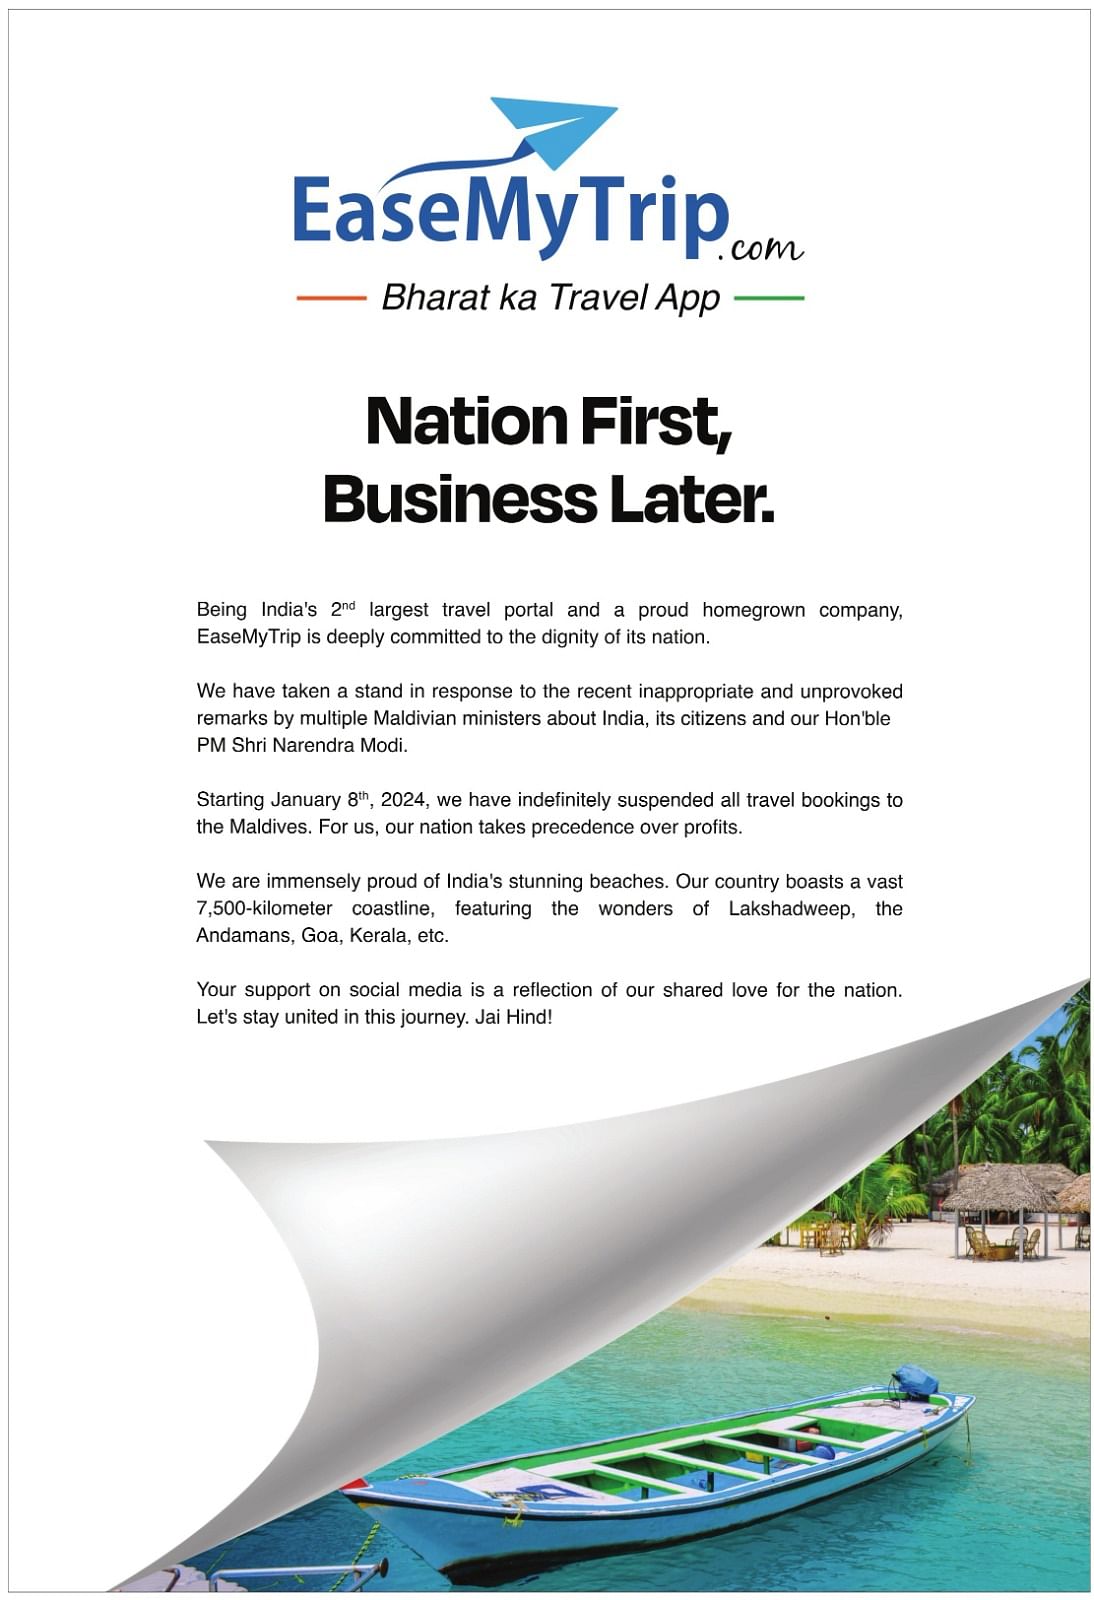 EaseMyTrip reiterates its decision to suspend all travel bookings to the Maldives with a print ad